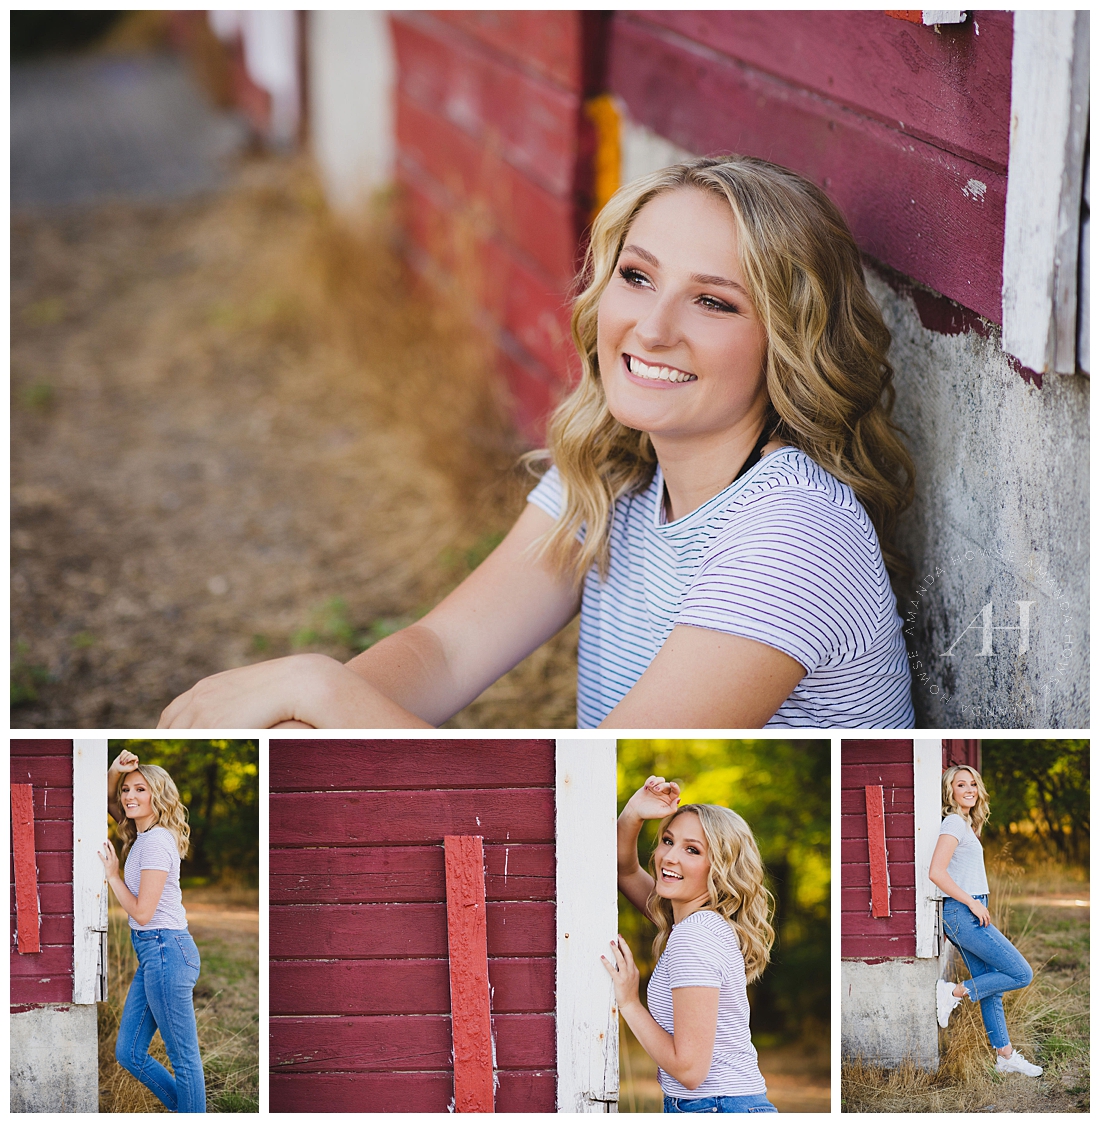 Rustic Senior Portraits in front of a classic red barn photographed by Tacoma Senior Photographer Amanda Howse